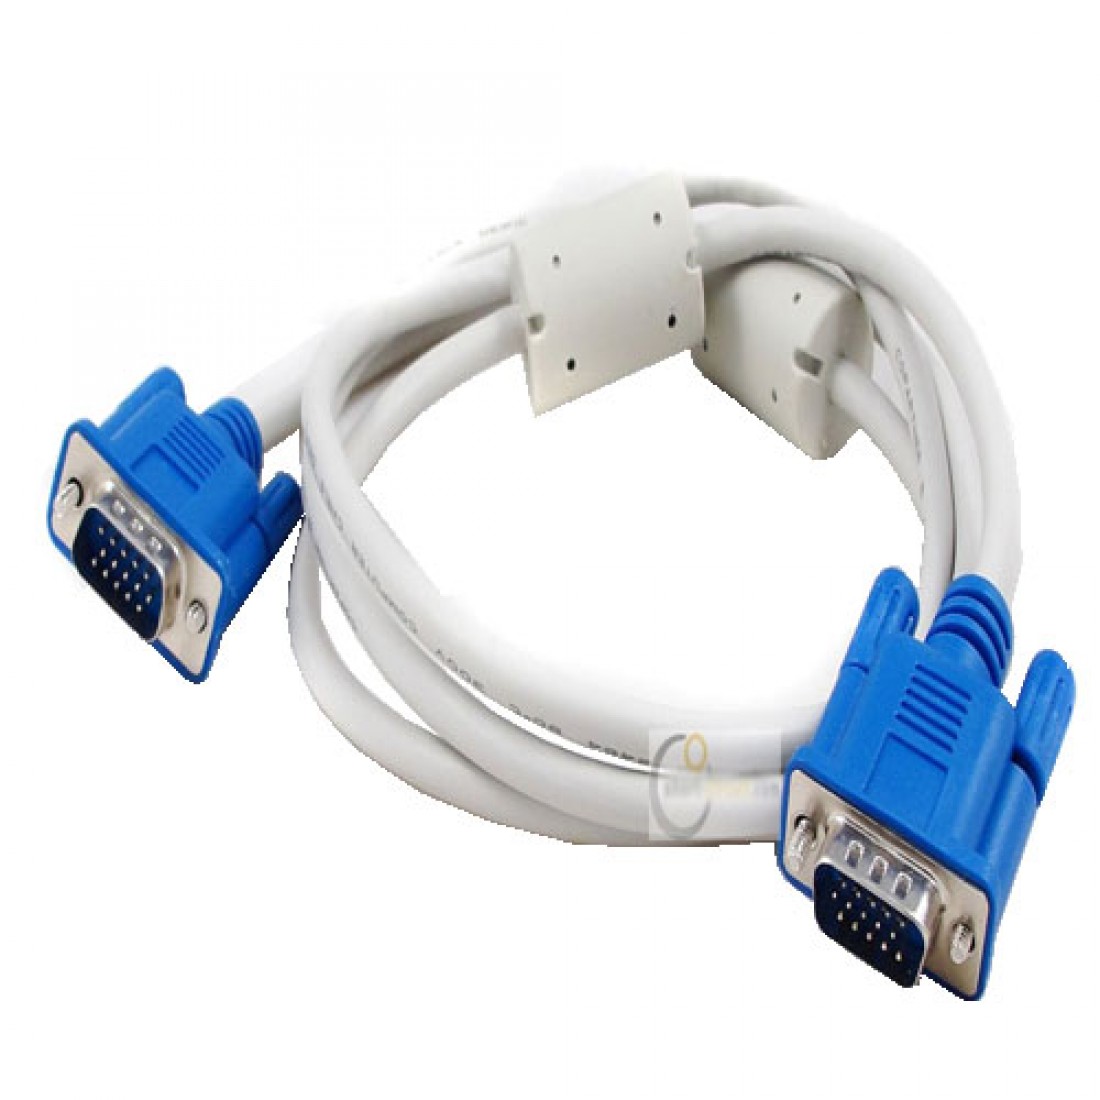  VGA CABLE3+4 WITH 2 FILTER JV01-20 MTR 